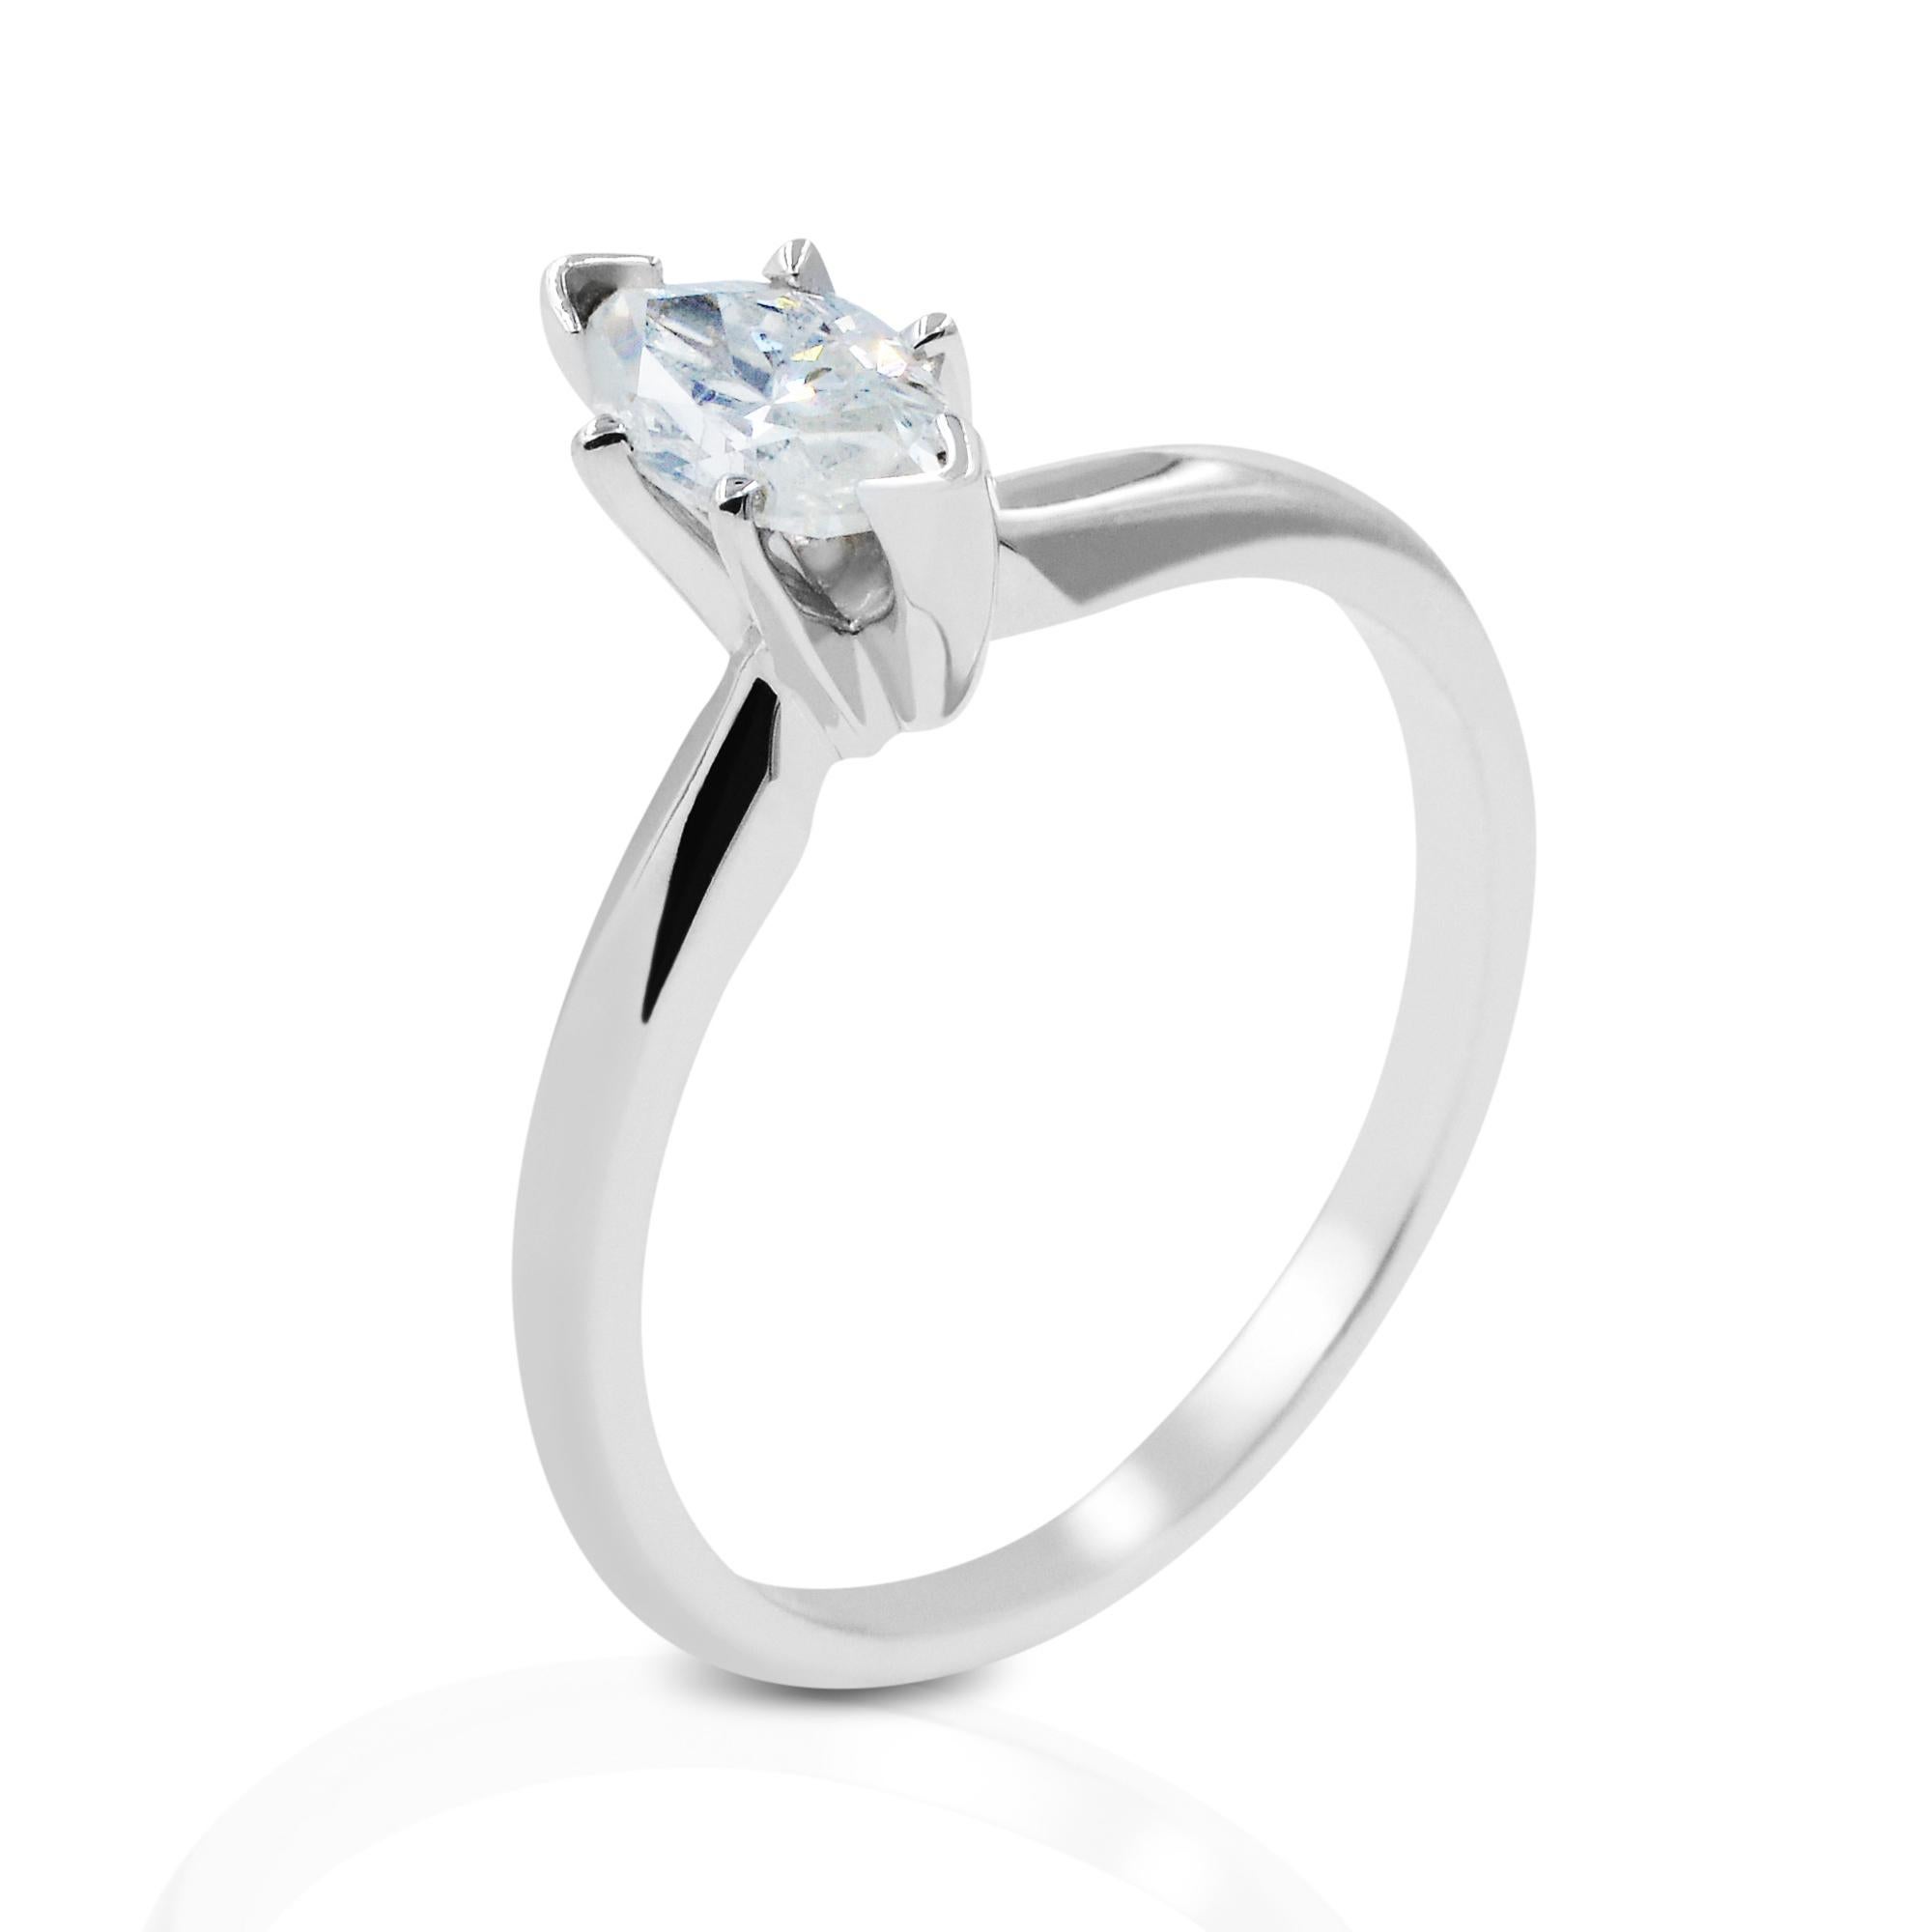 This gorgeous solitaire engagement ring features a prong set marquise cut diamond weighing 0.53 carat. Simple yet stunning engagement ring crafted in 14k white gold. The white gold is rhodium finished giving this design the look of platinum. Diamond